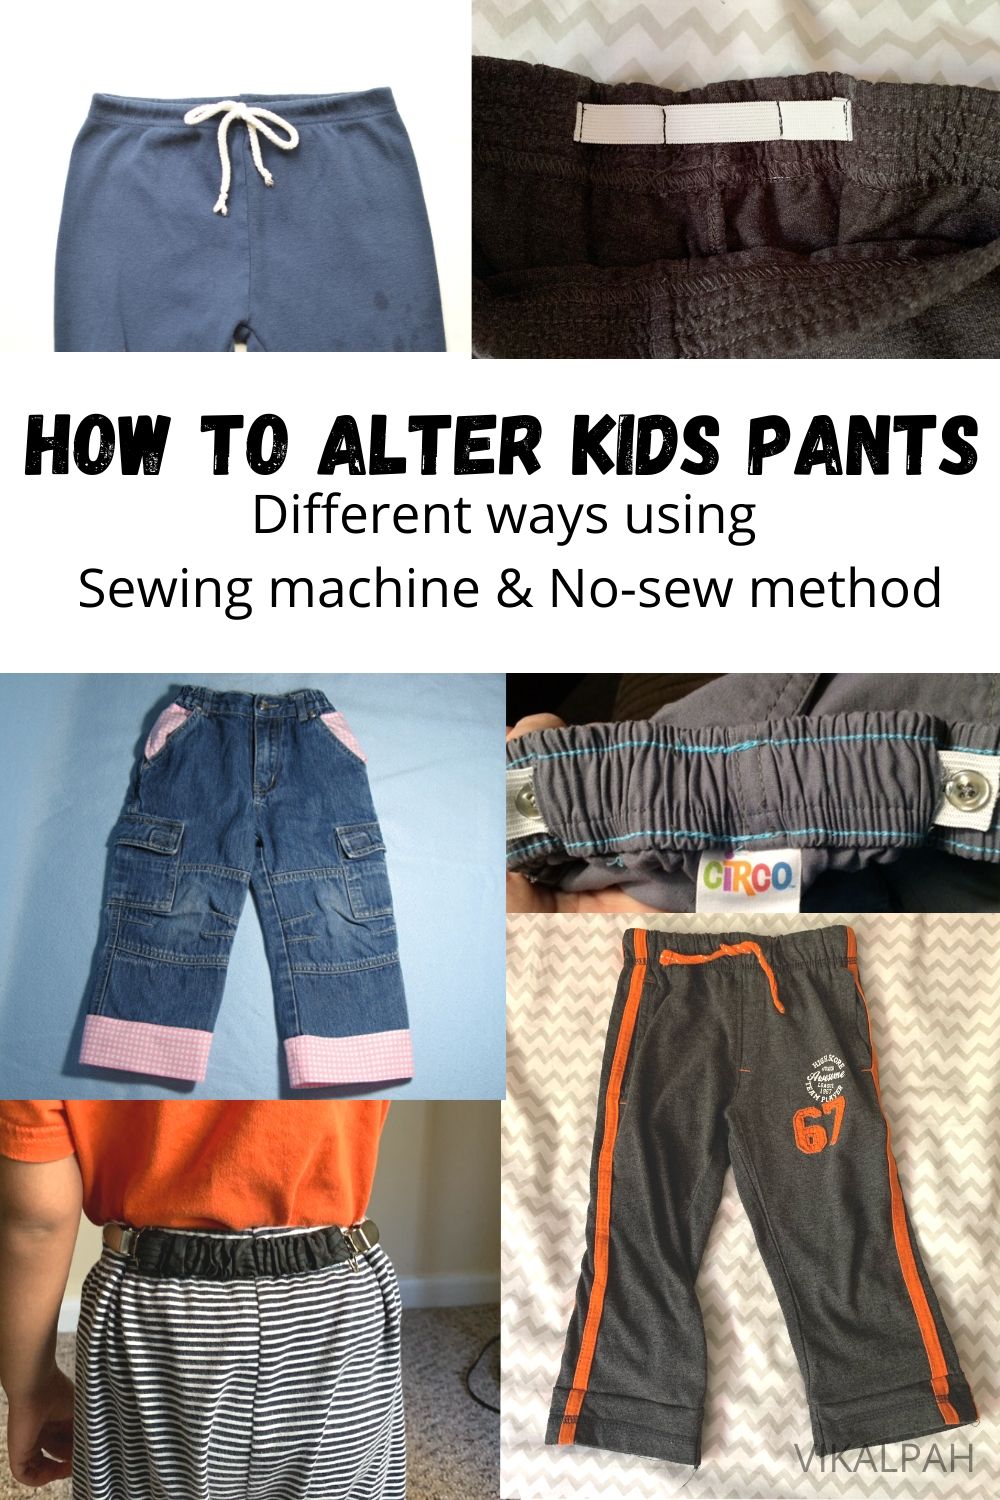 Vikalpah: How to alter kids pants - Different ways of No-sew